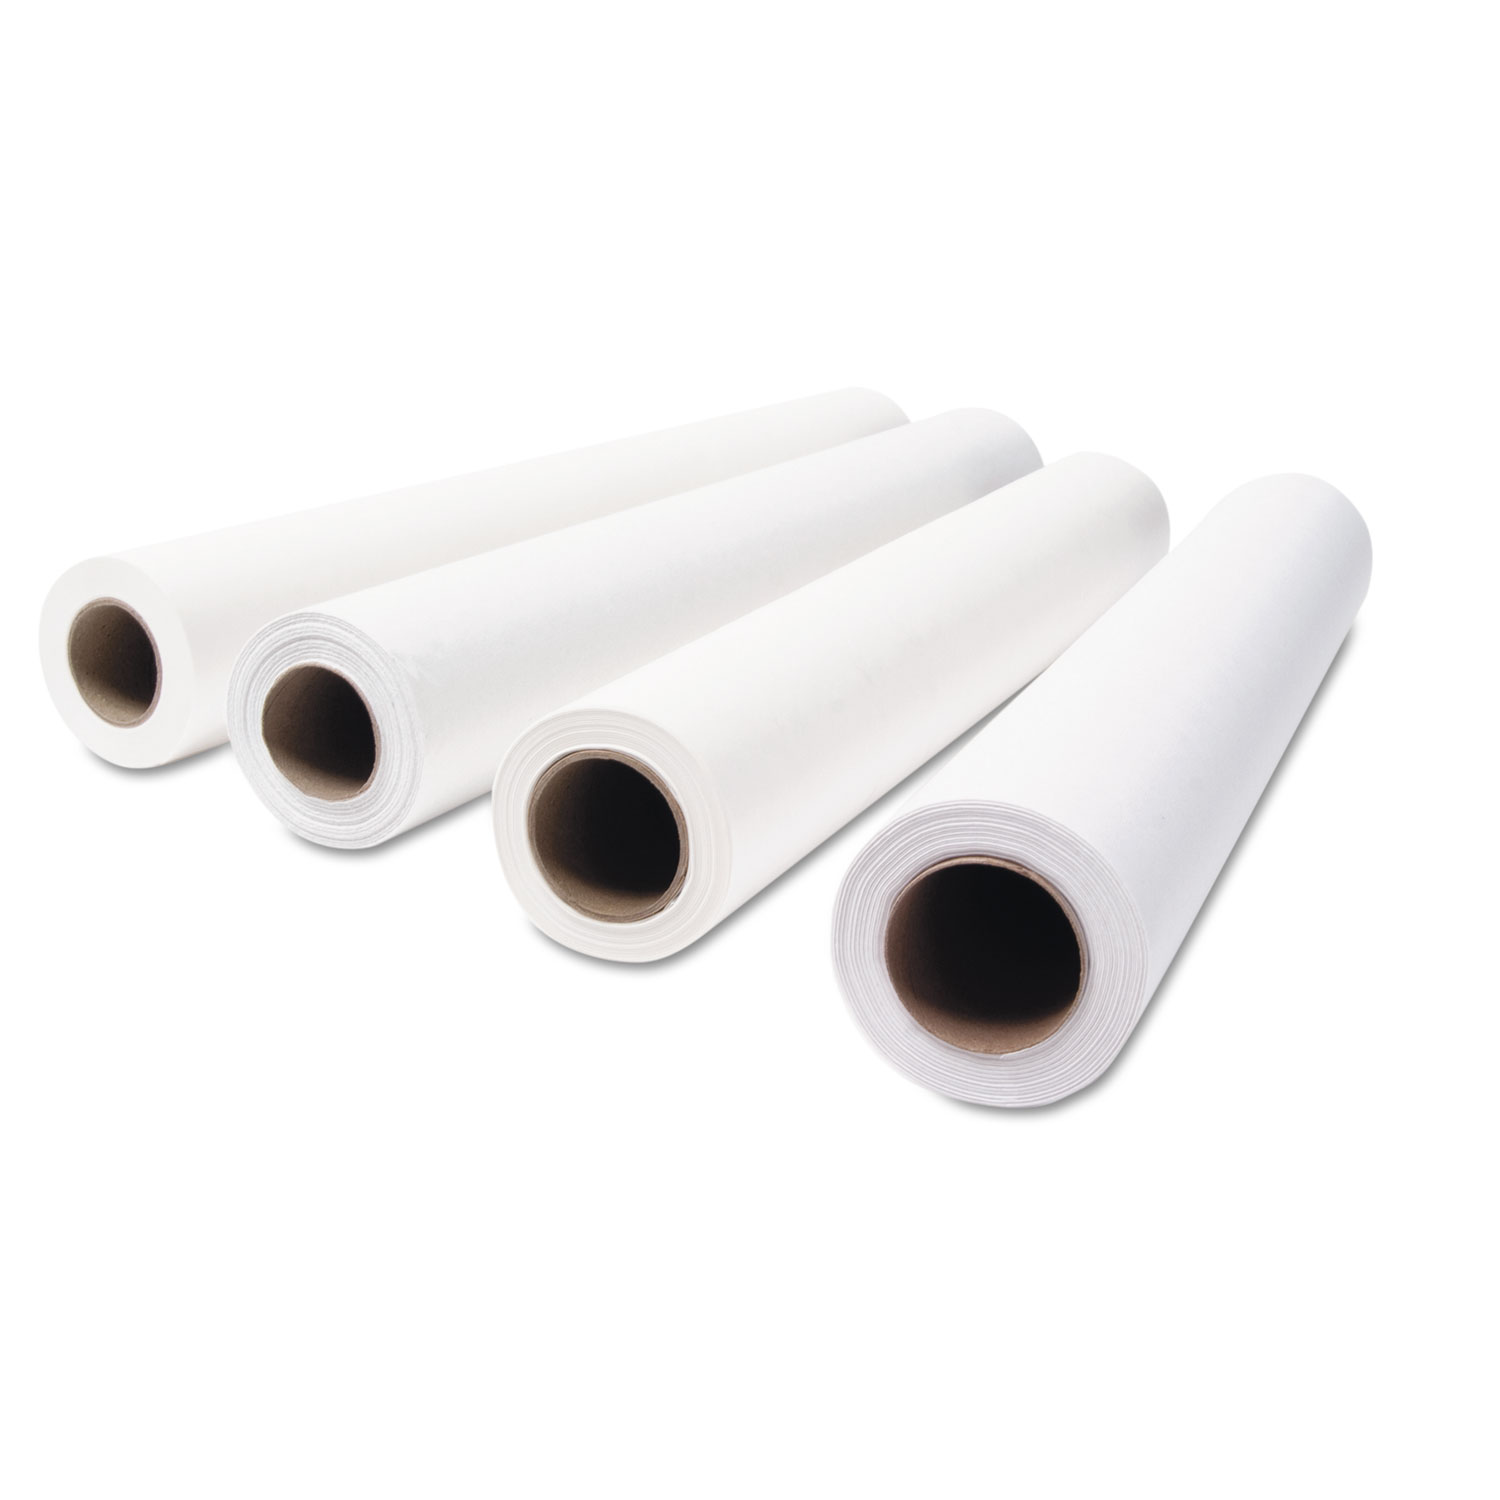 Standard Exam Table Paper, Smooth Texture, 18 x 225ft, White, 12/Carton